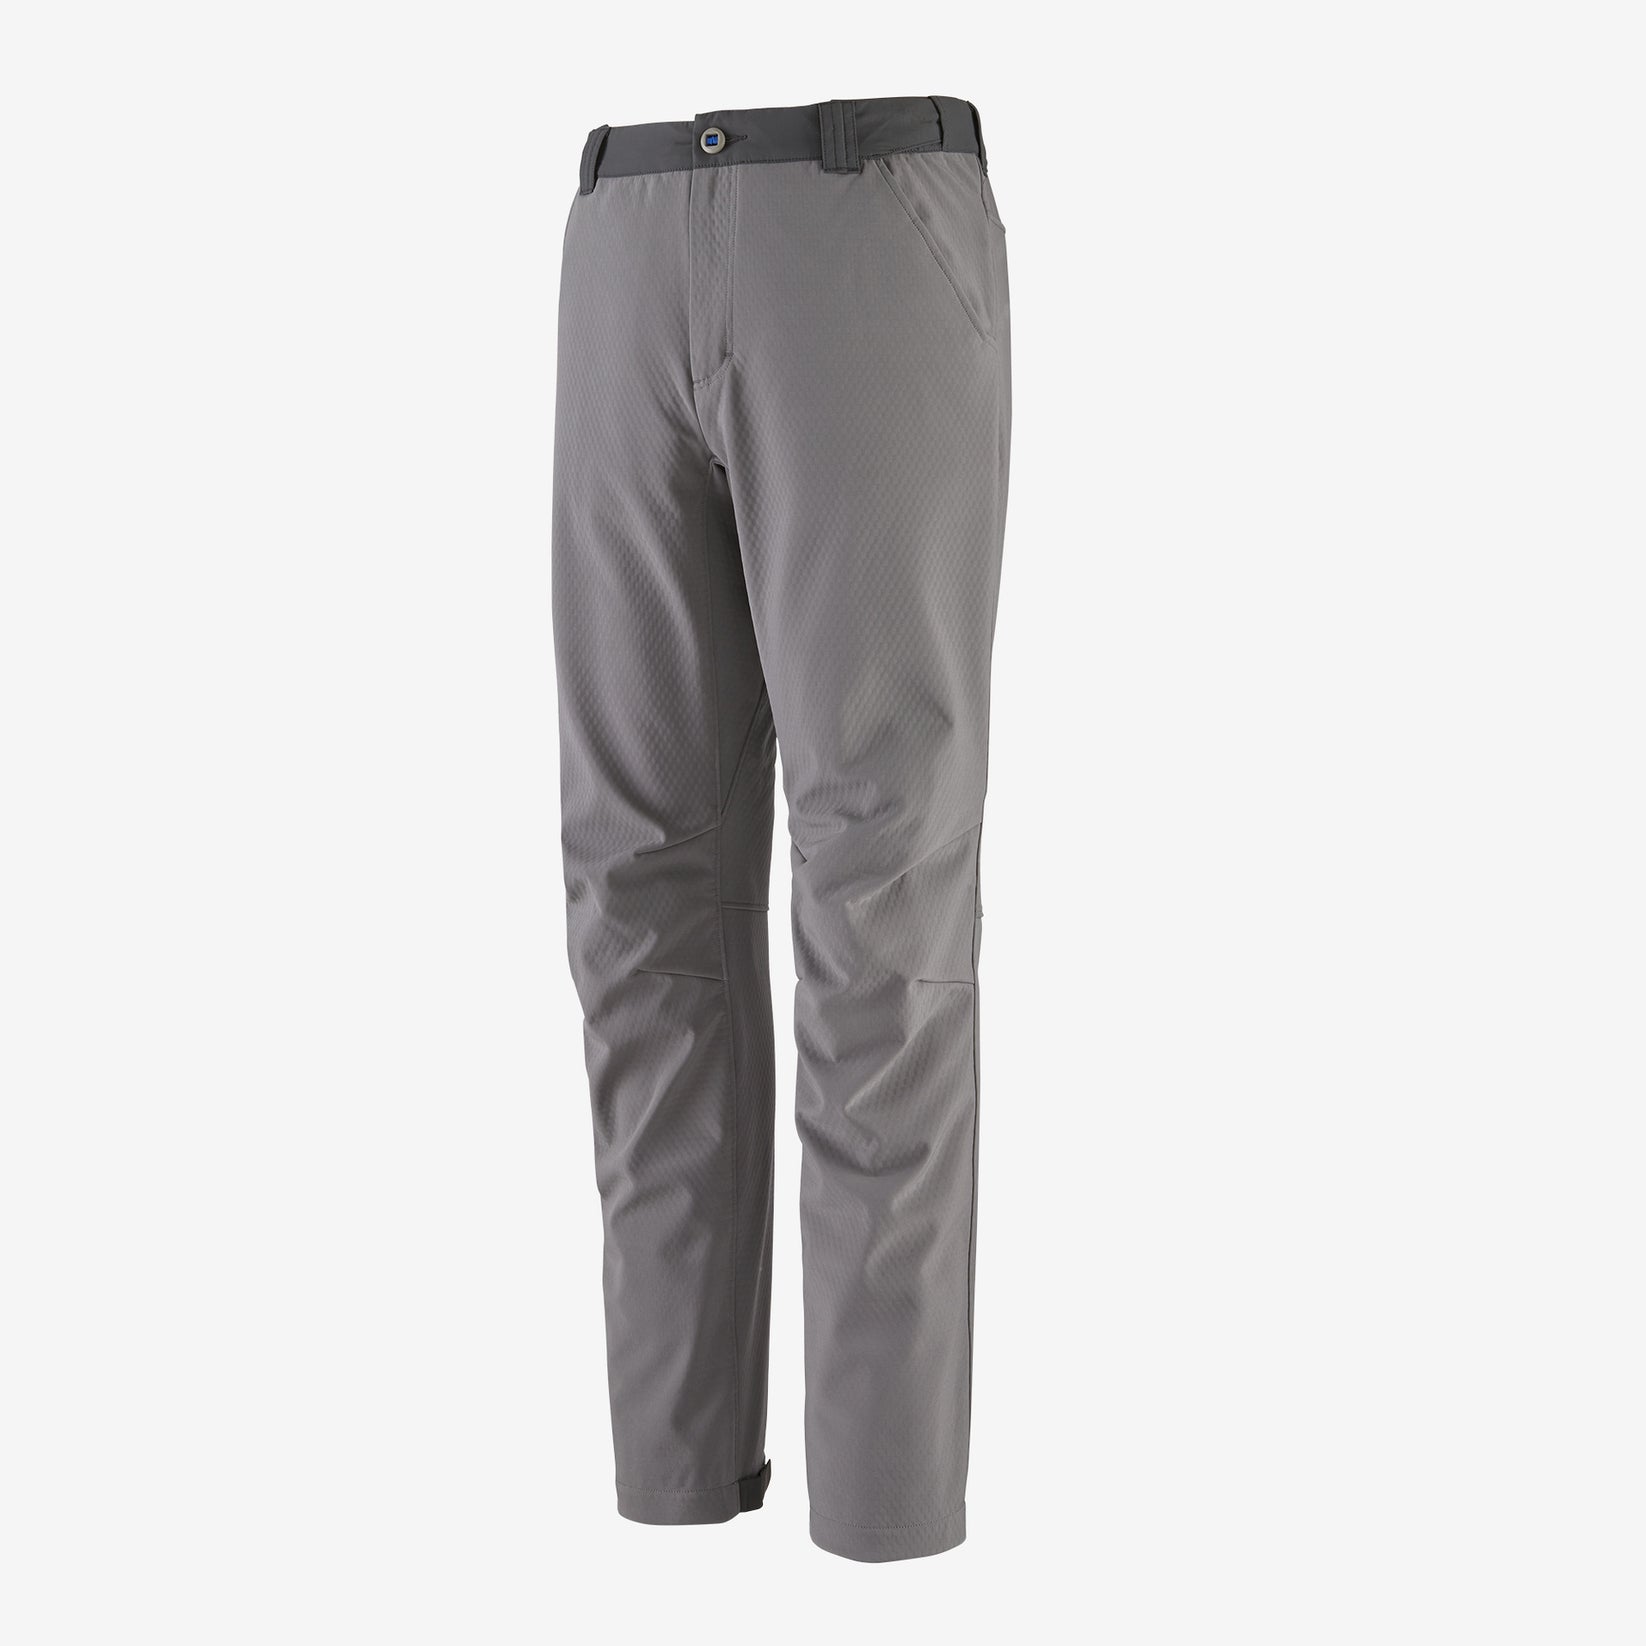 Patagonia Shelled Insulator Pants – charliesflybox